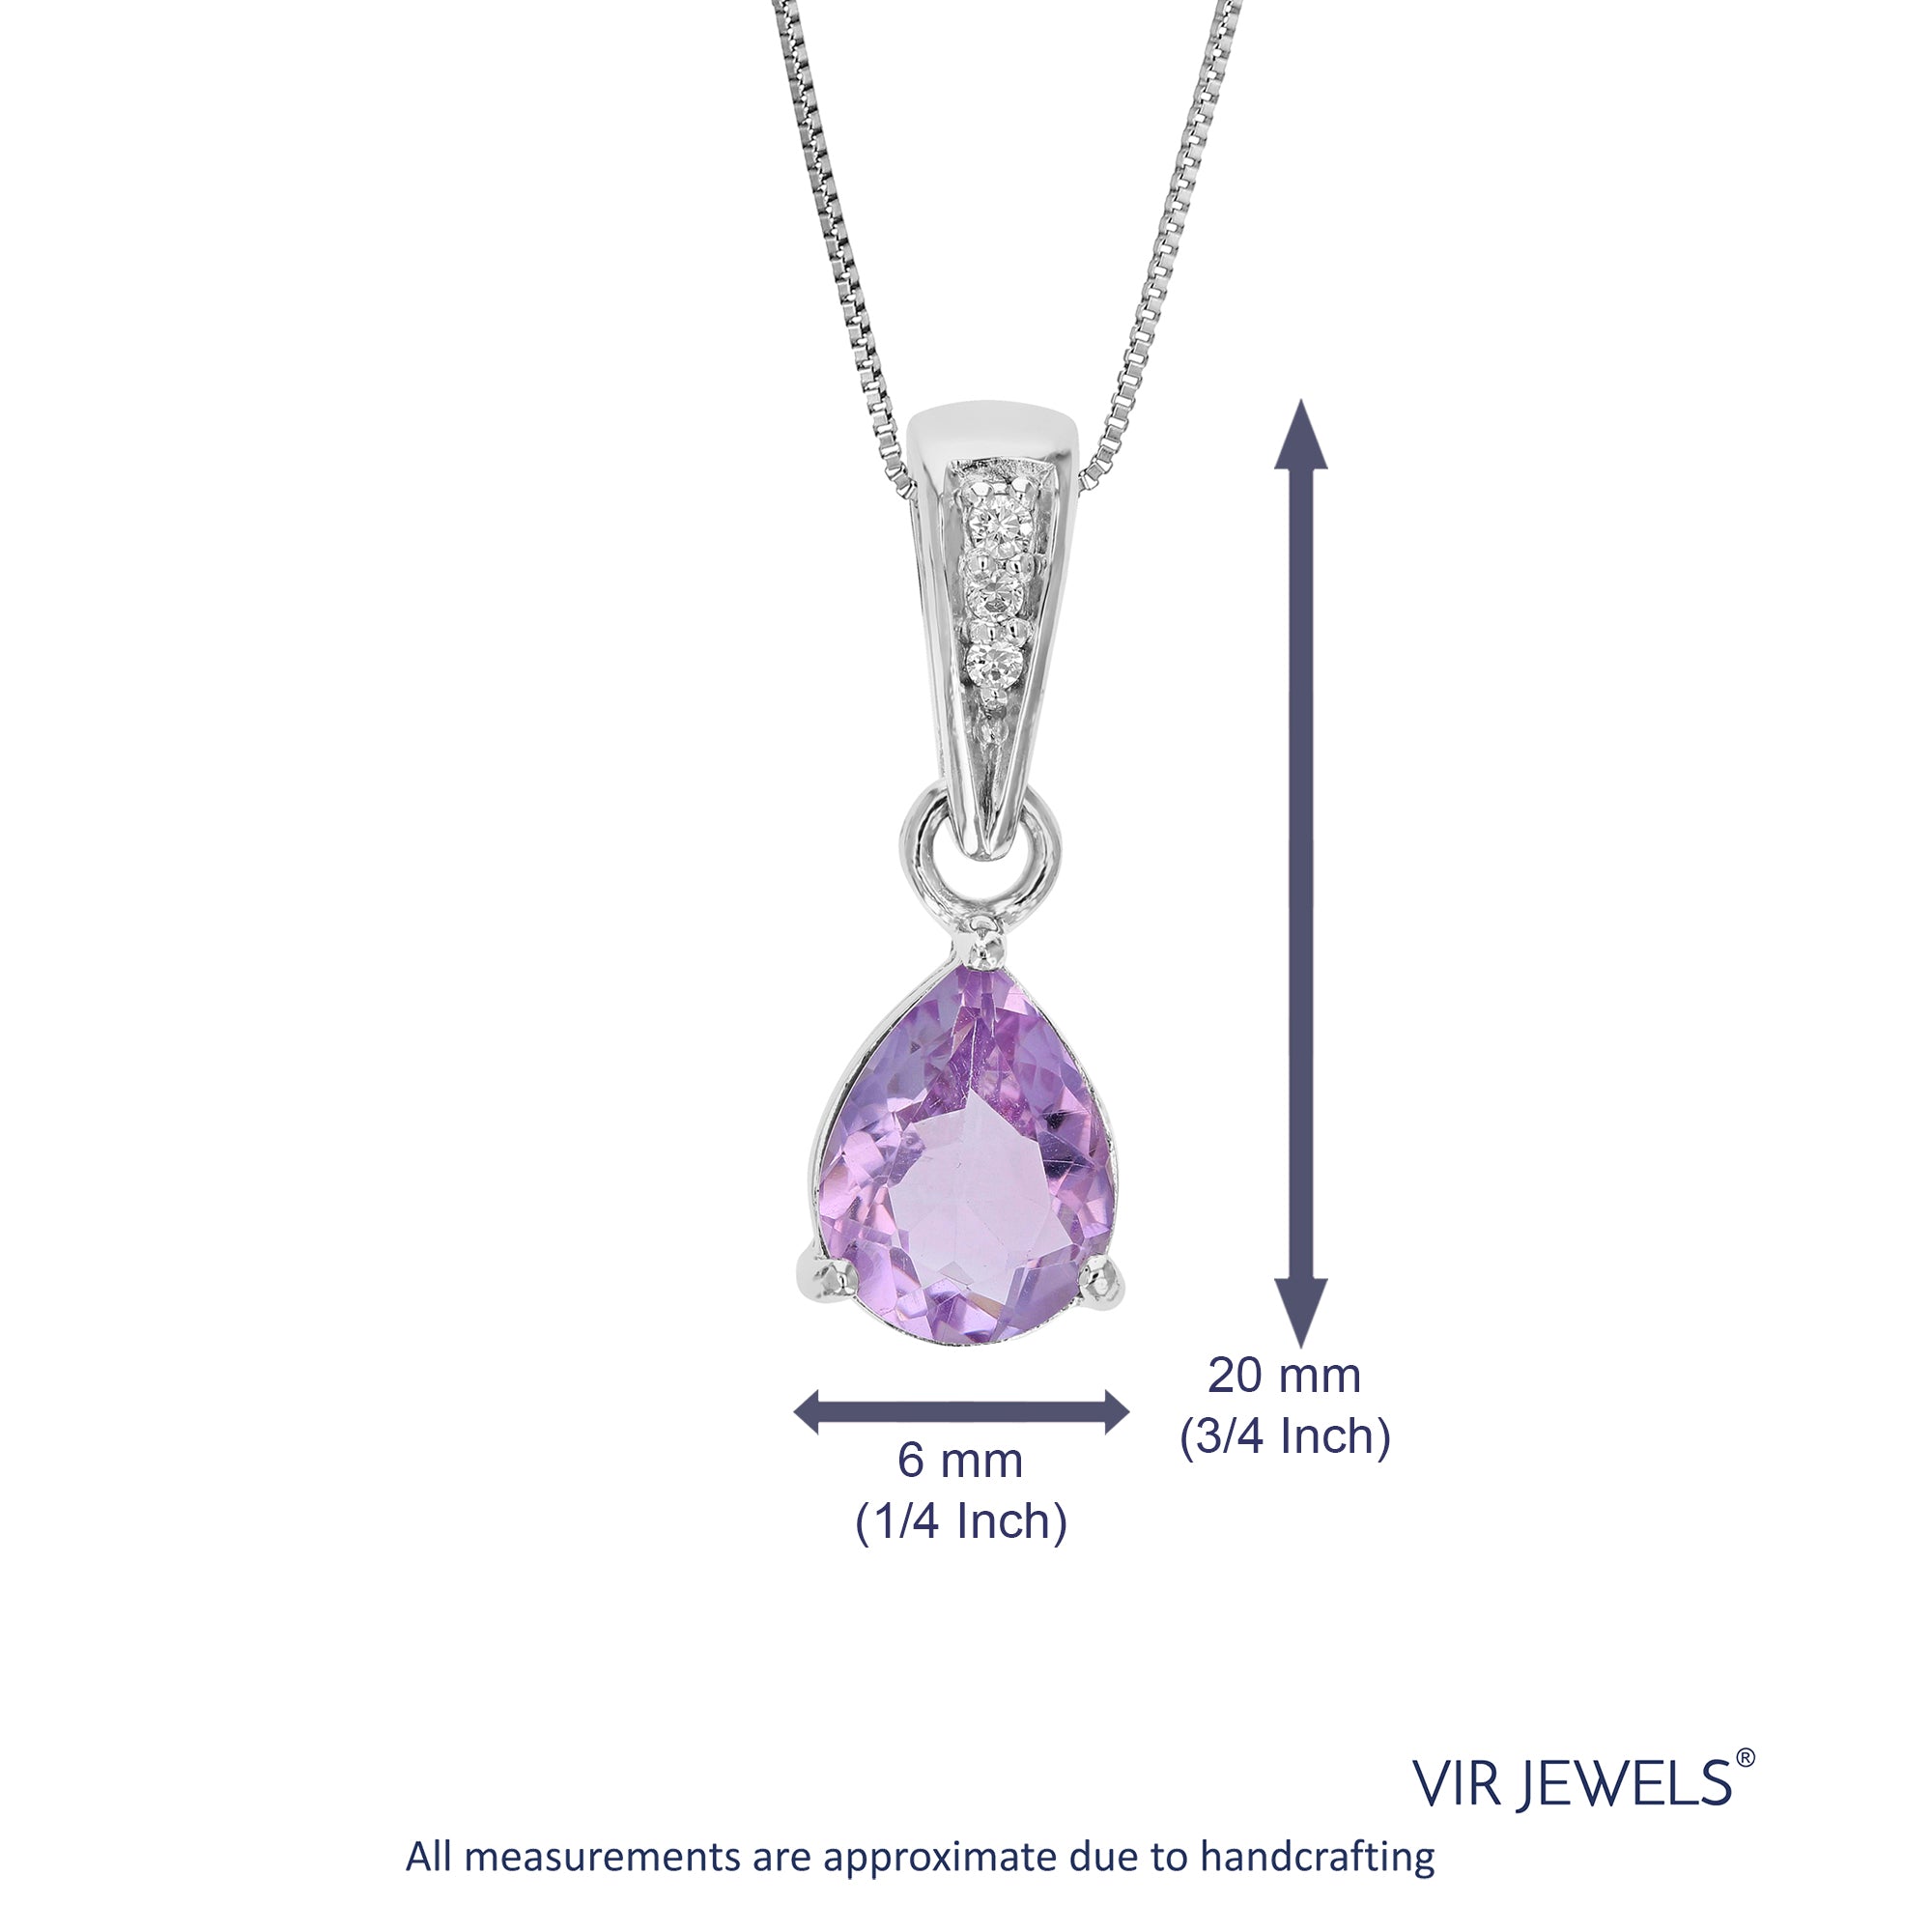 0.85 cttw Pendant Necklace, Purple Amethyst Pear Shape Pendant Necklace for Women in .925 Sterling Silver with Rhodium, 18 Inch Chain, Prong Setting